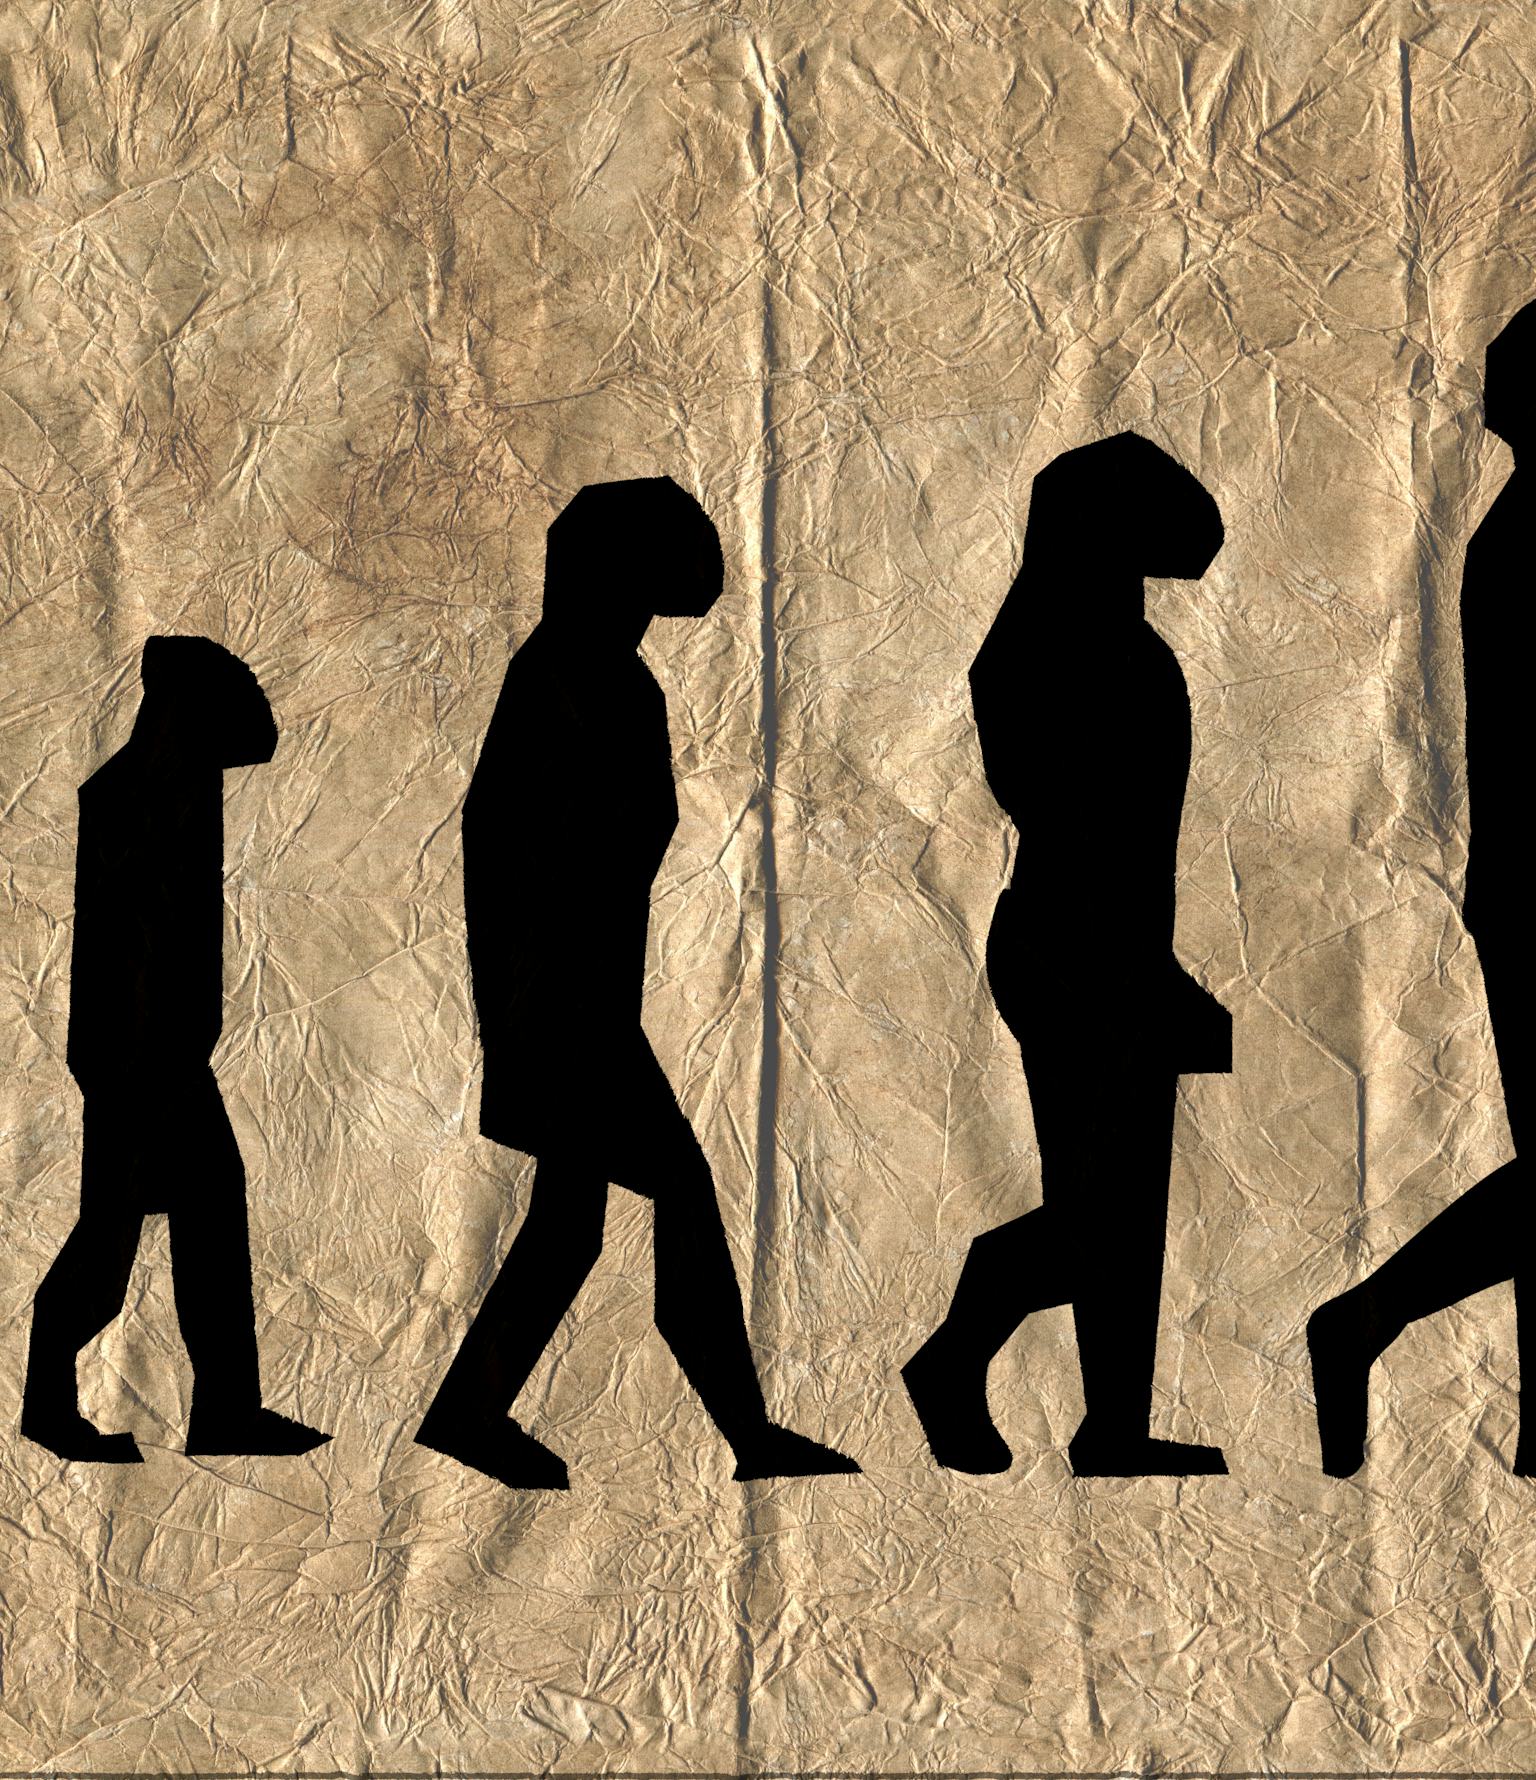 Was Walking Invented? Discover the Surprising Truth!